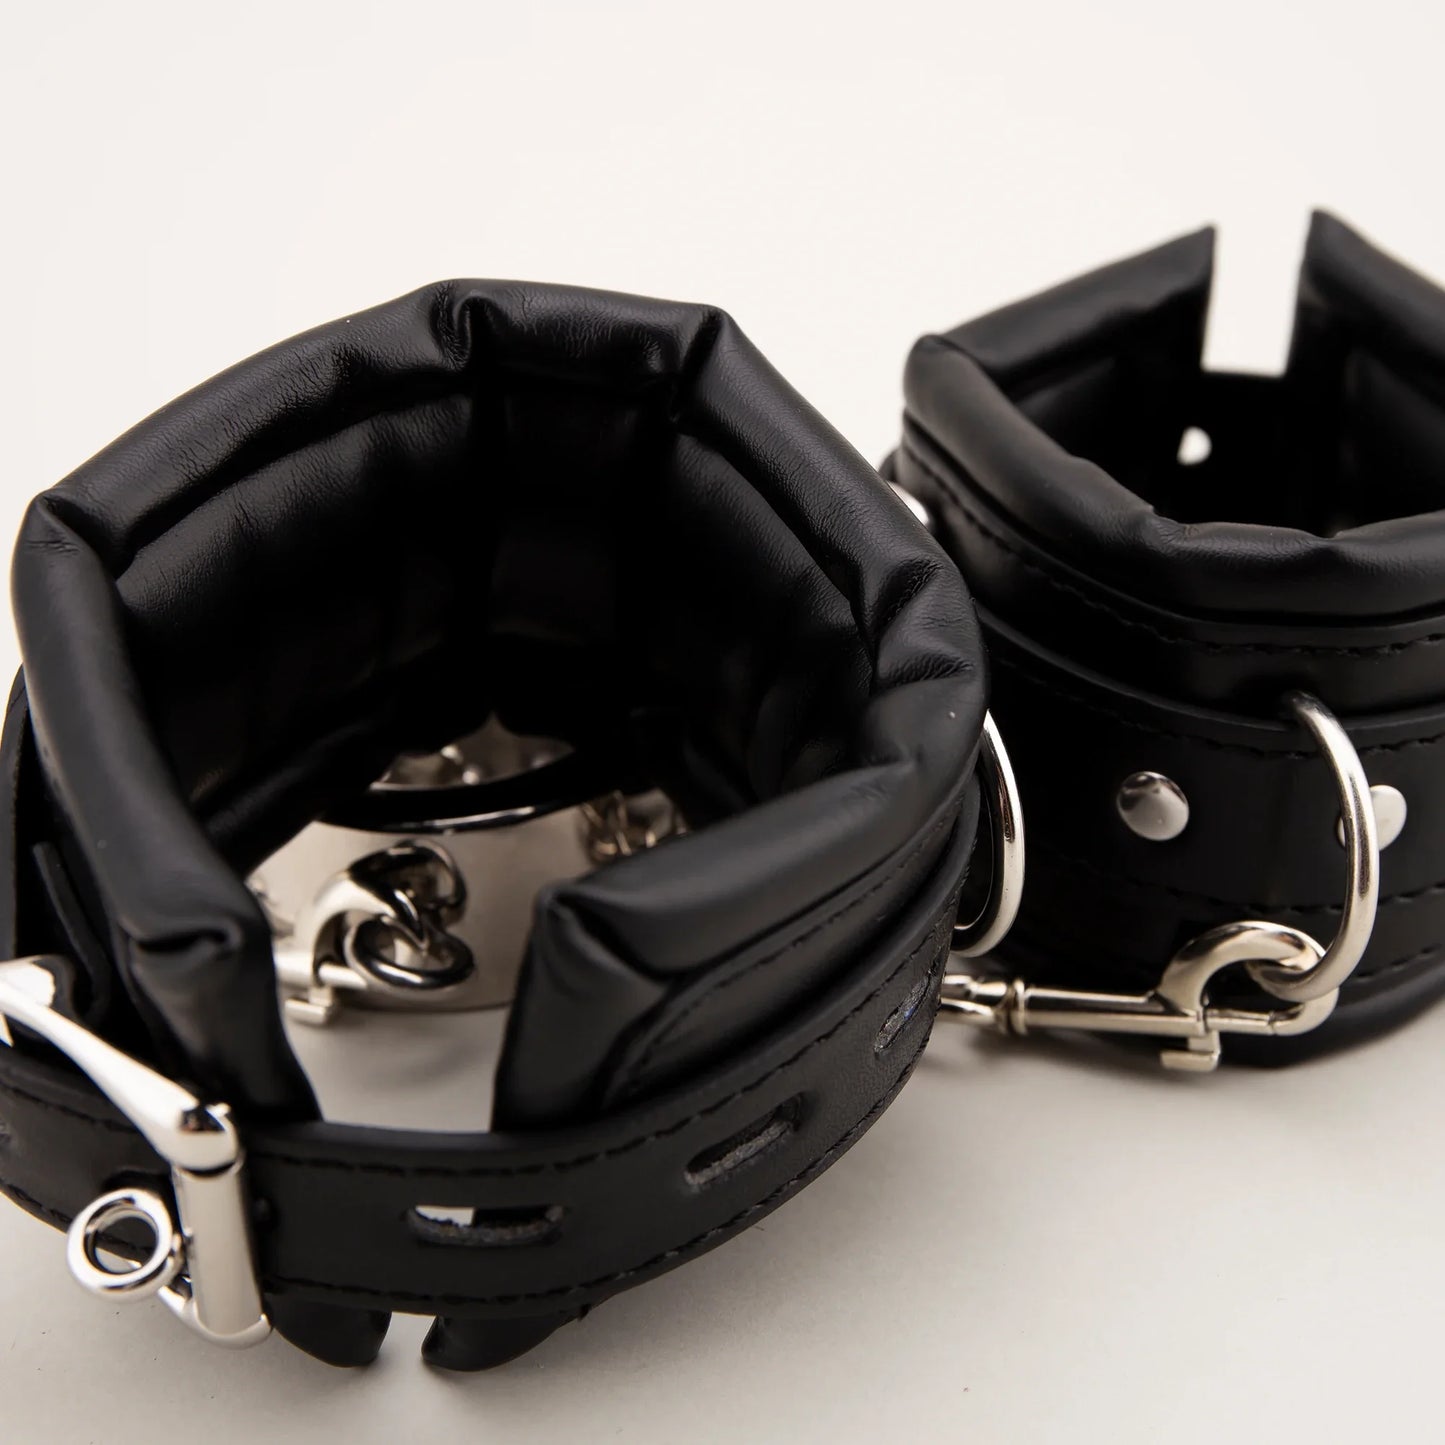 Steel Scrotum Restraint with Attached Hand or Ankle Cuffs